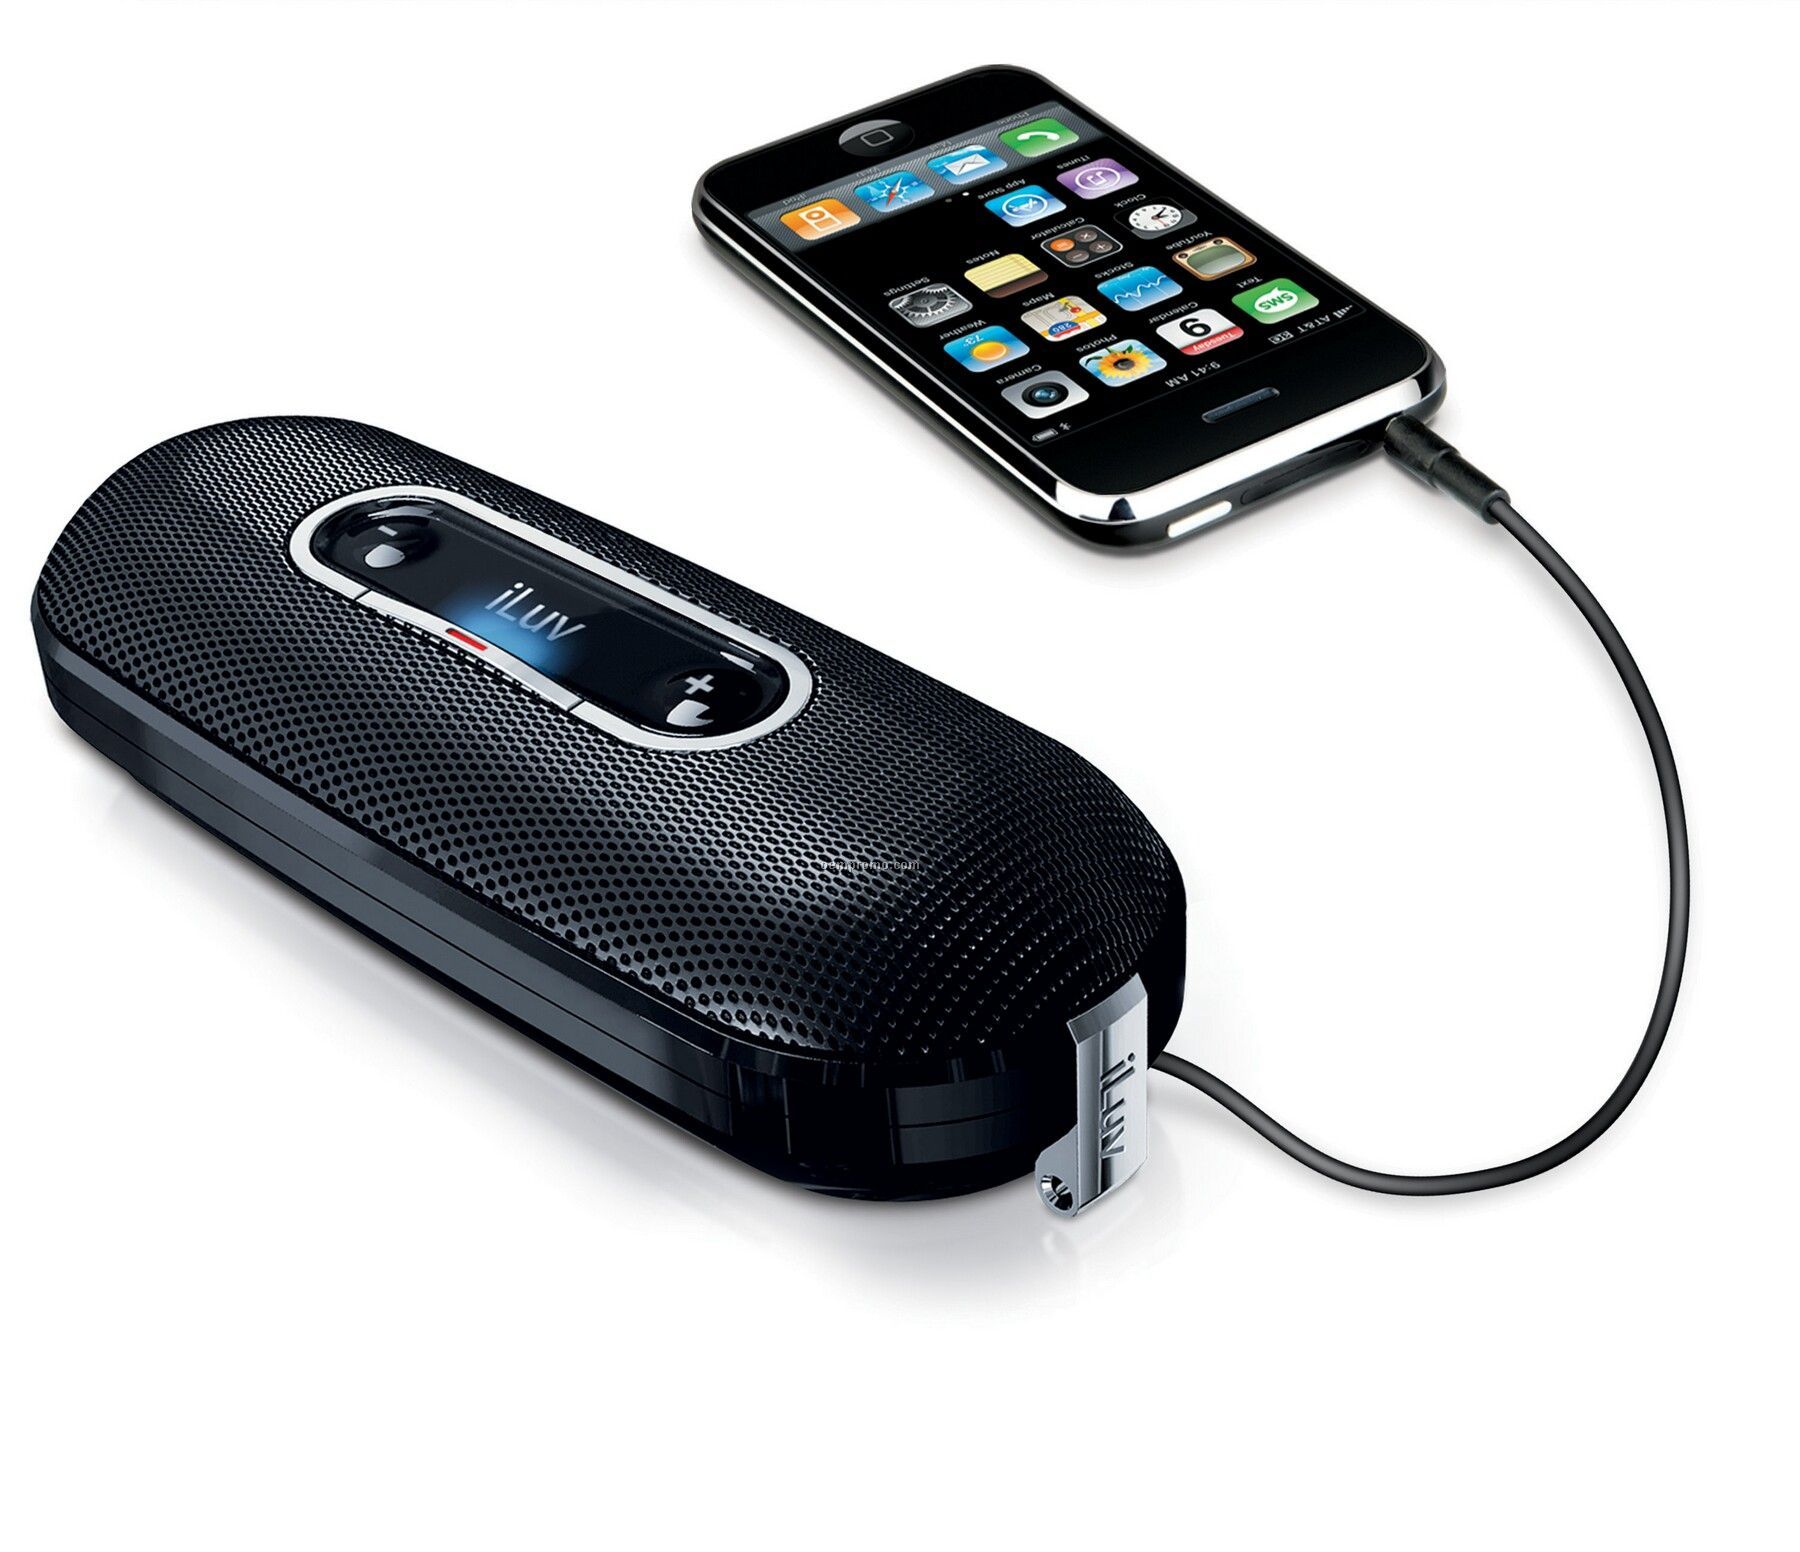 Iluv Portable Speaker For Mp3 Players And - Black